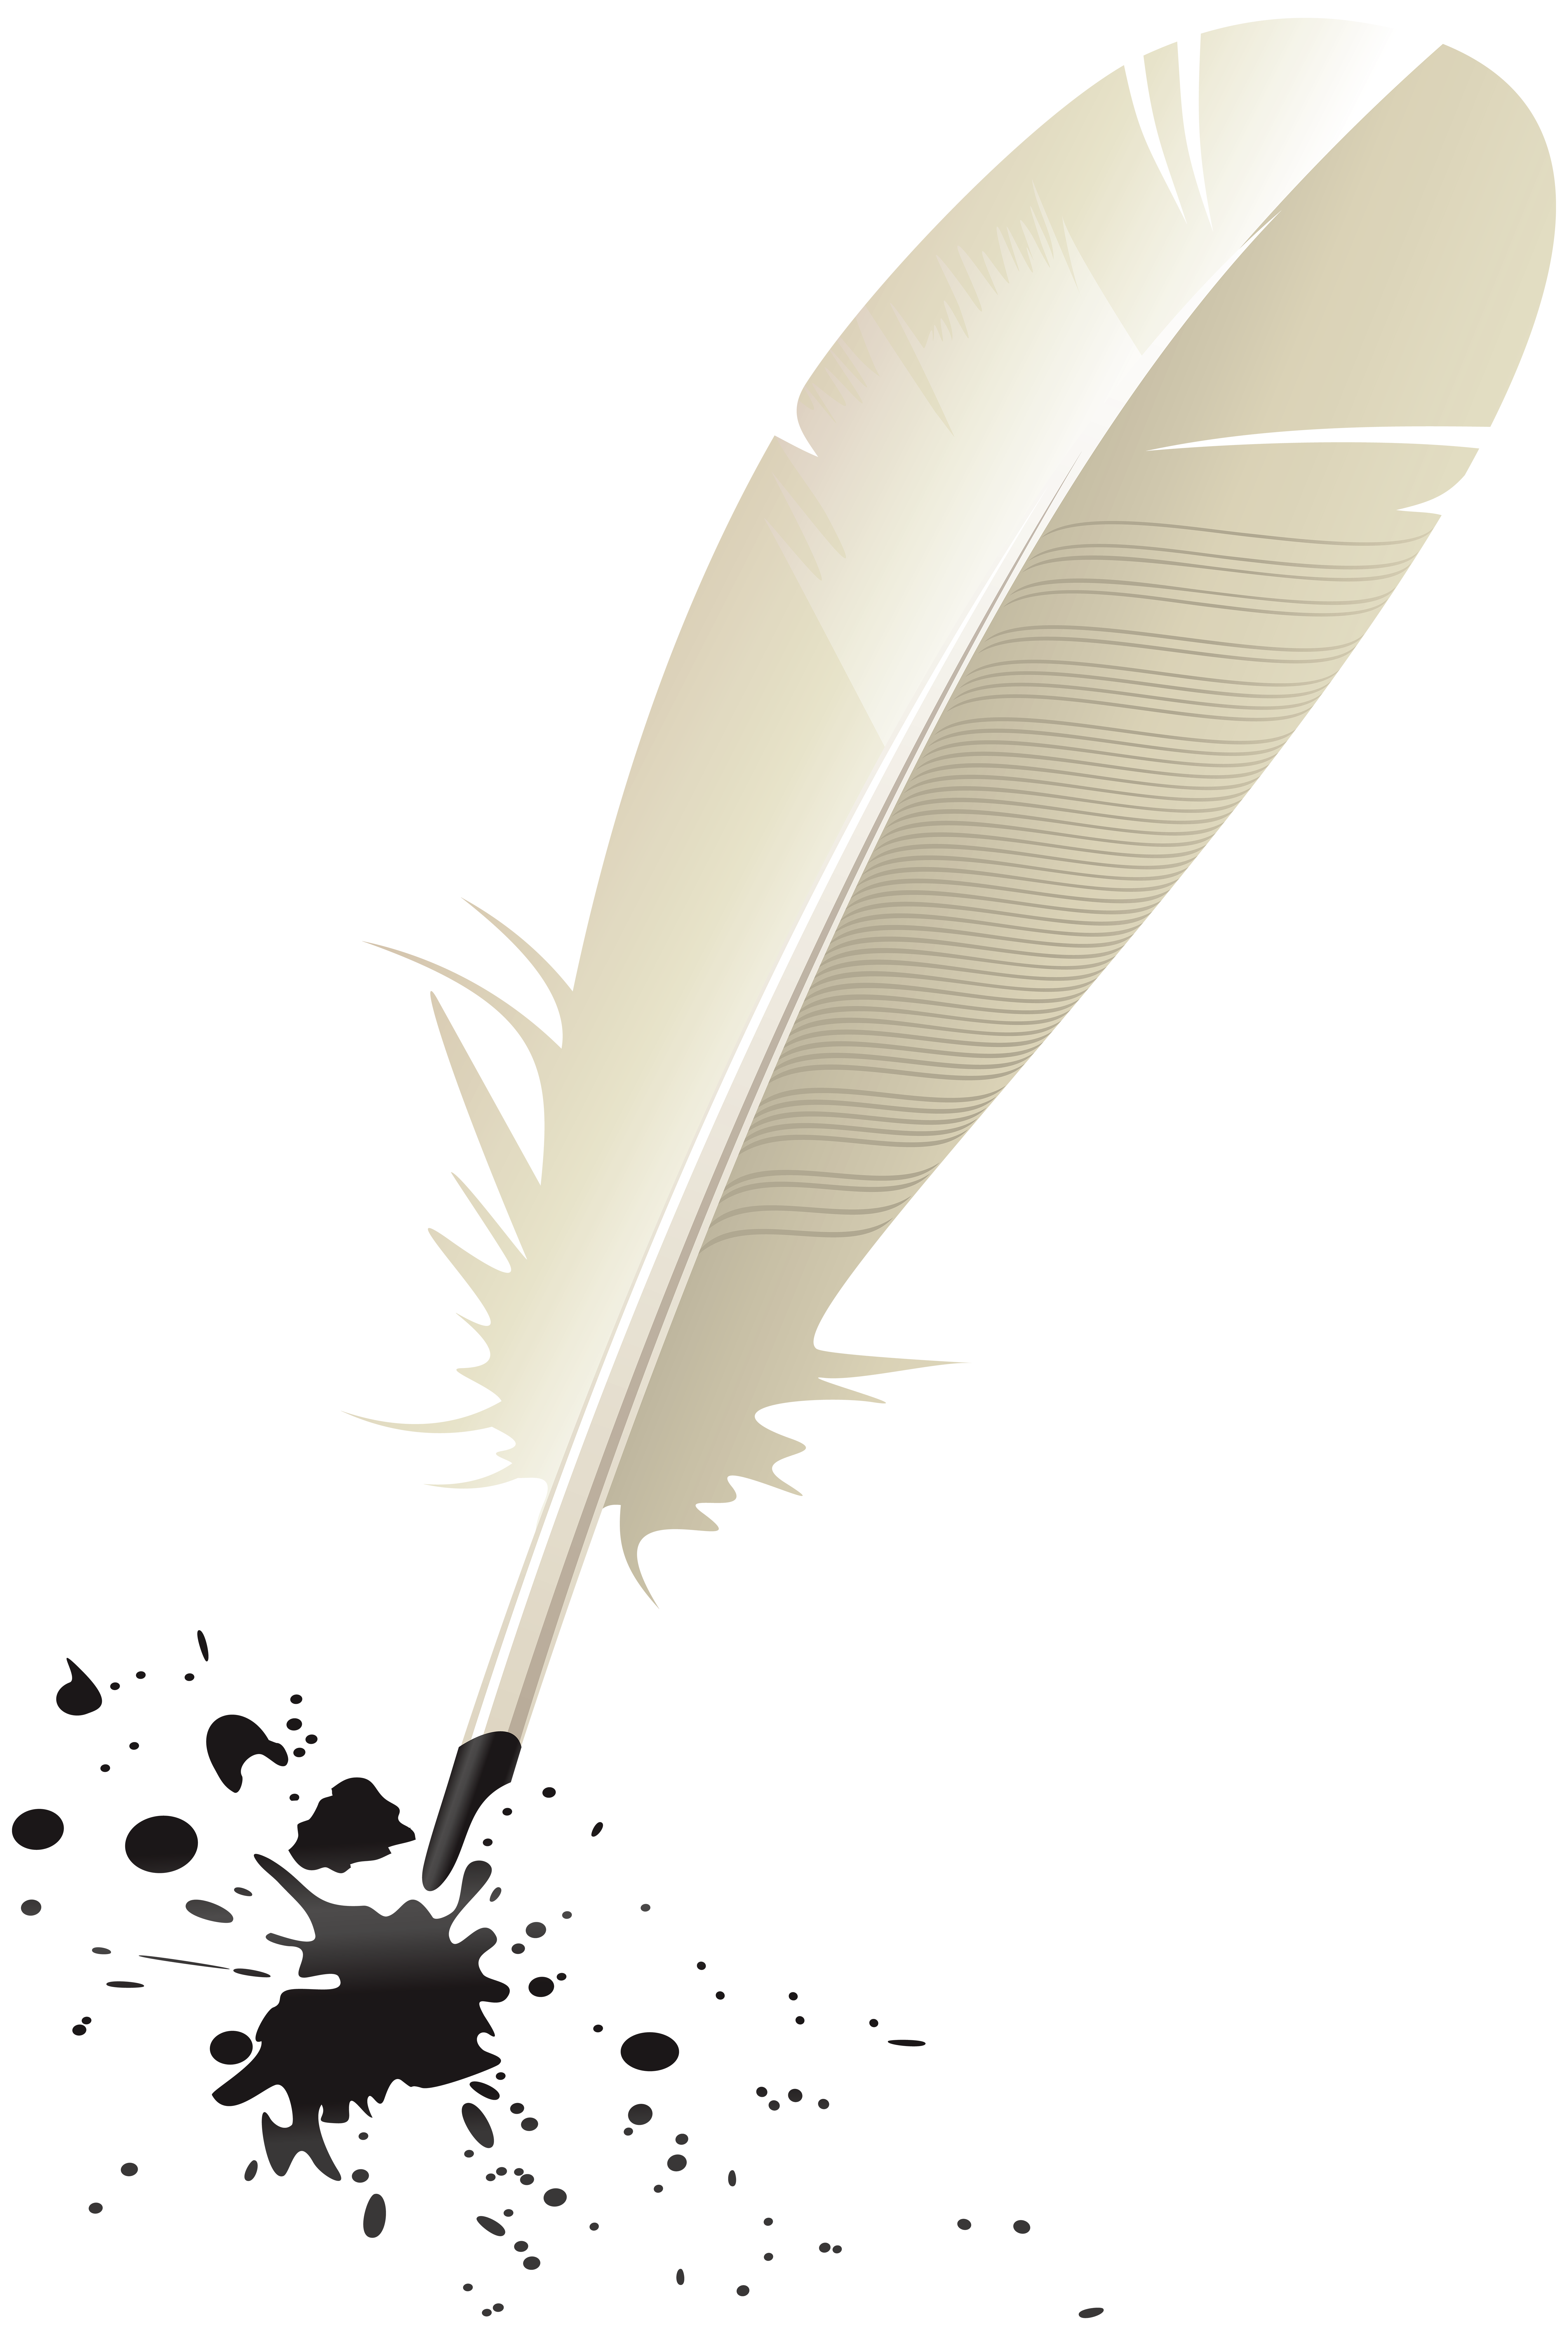 Quill and Ink PNG Clip Art Image​